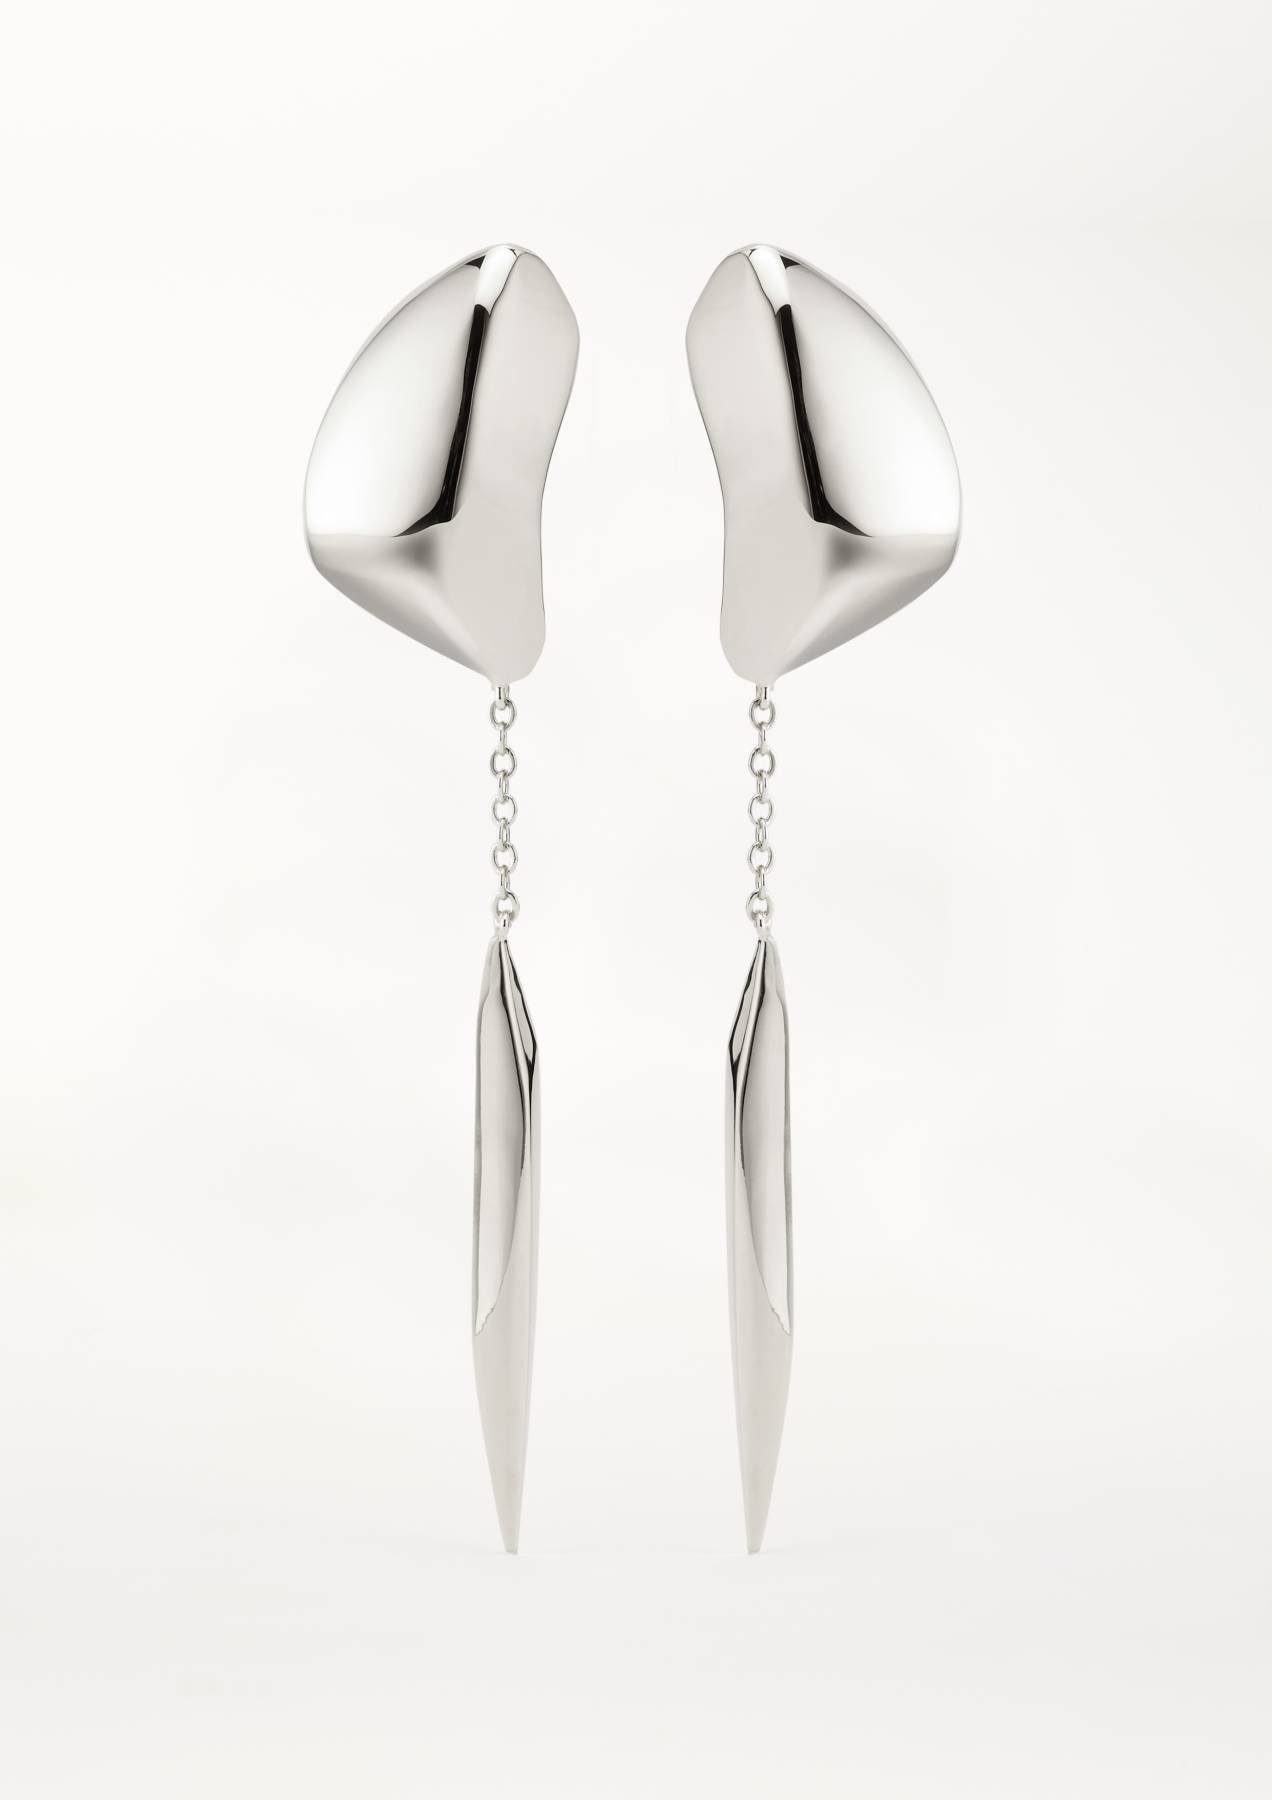 statement earrings with long chain pendant in clean sculptural design in silver 